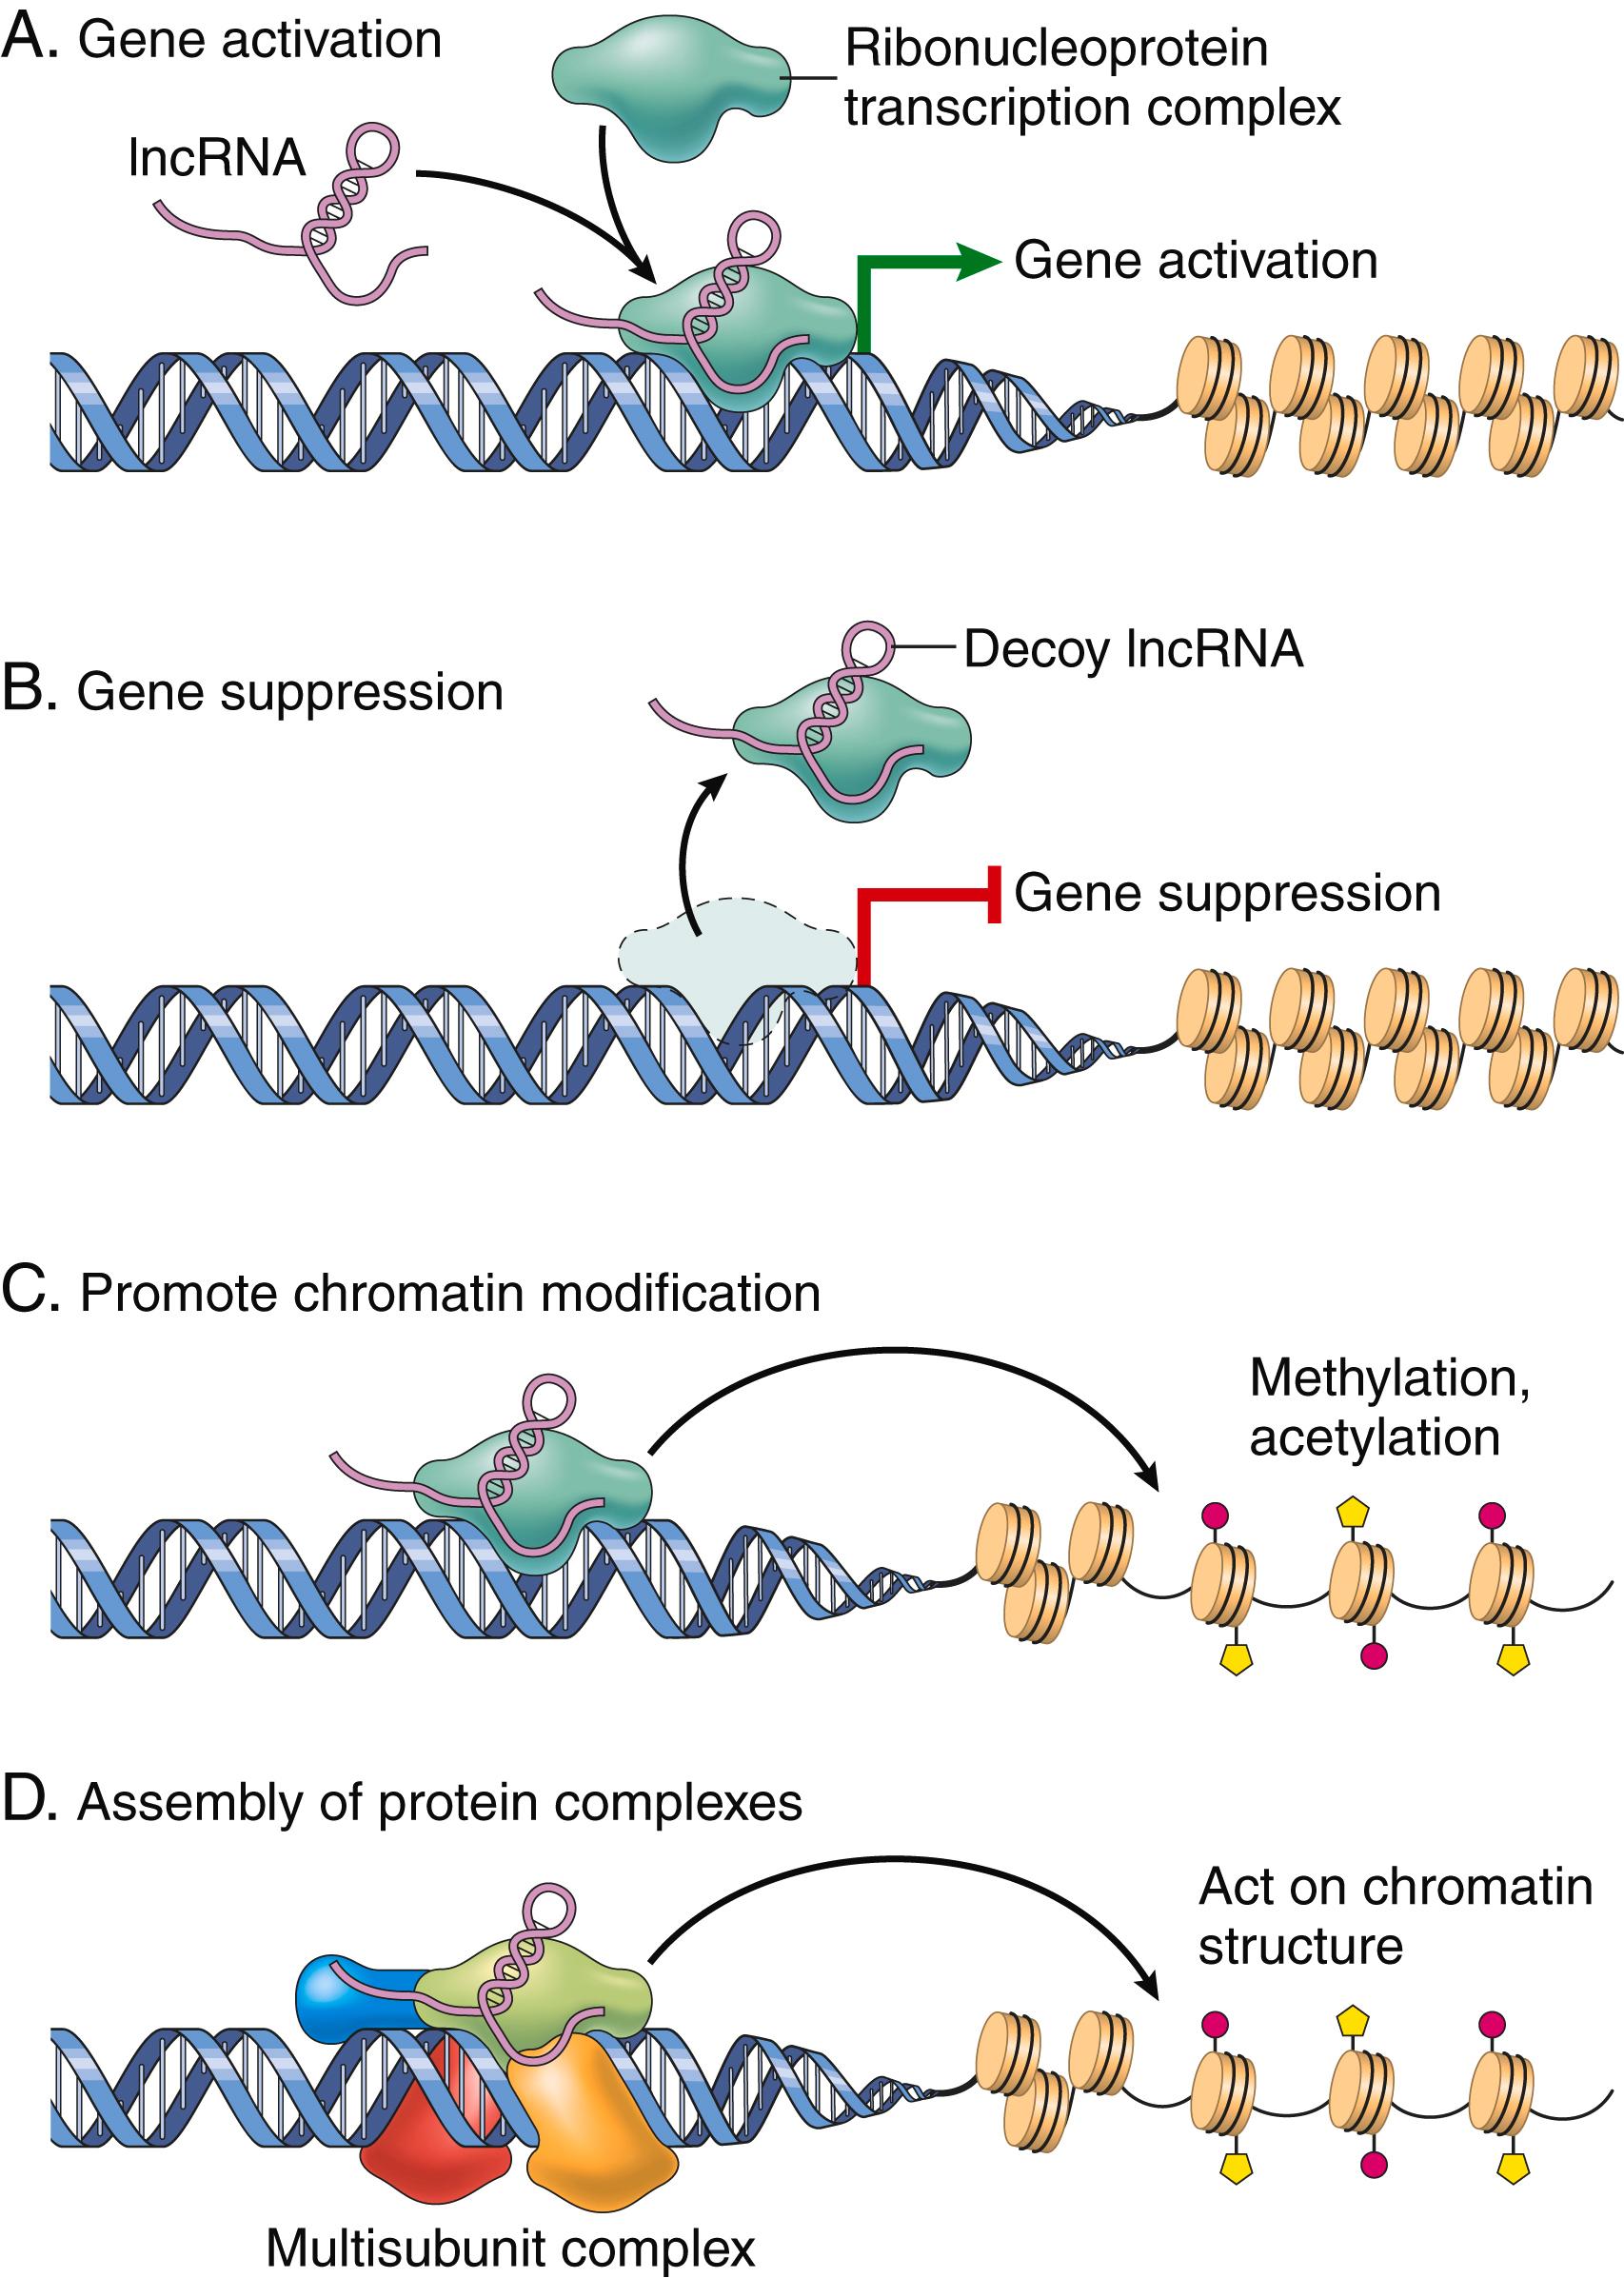 FIG. 4.3, Roles of long noncoding RNAs (lncRNAs). (A) lncRNAs can facilitate transcription factor binding and thus promote gene activation. (B) Conversely, lncRNAs can preemptively bind transcription factors and thus prevent gene transcription. (C) Histone and DNA modification by acetylases or methylases (or deacetylases and demethylases) may be directed by the binding of lncRNAs. (D) In other instances lncRNAs may act as scaffolding to stabilize secondary or tertiary structures and/or multisubunit complexes that influence general chromatin architecture or gene activity.